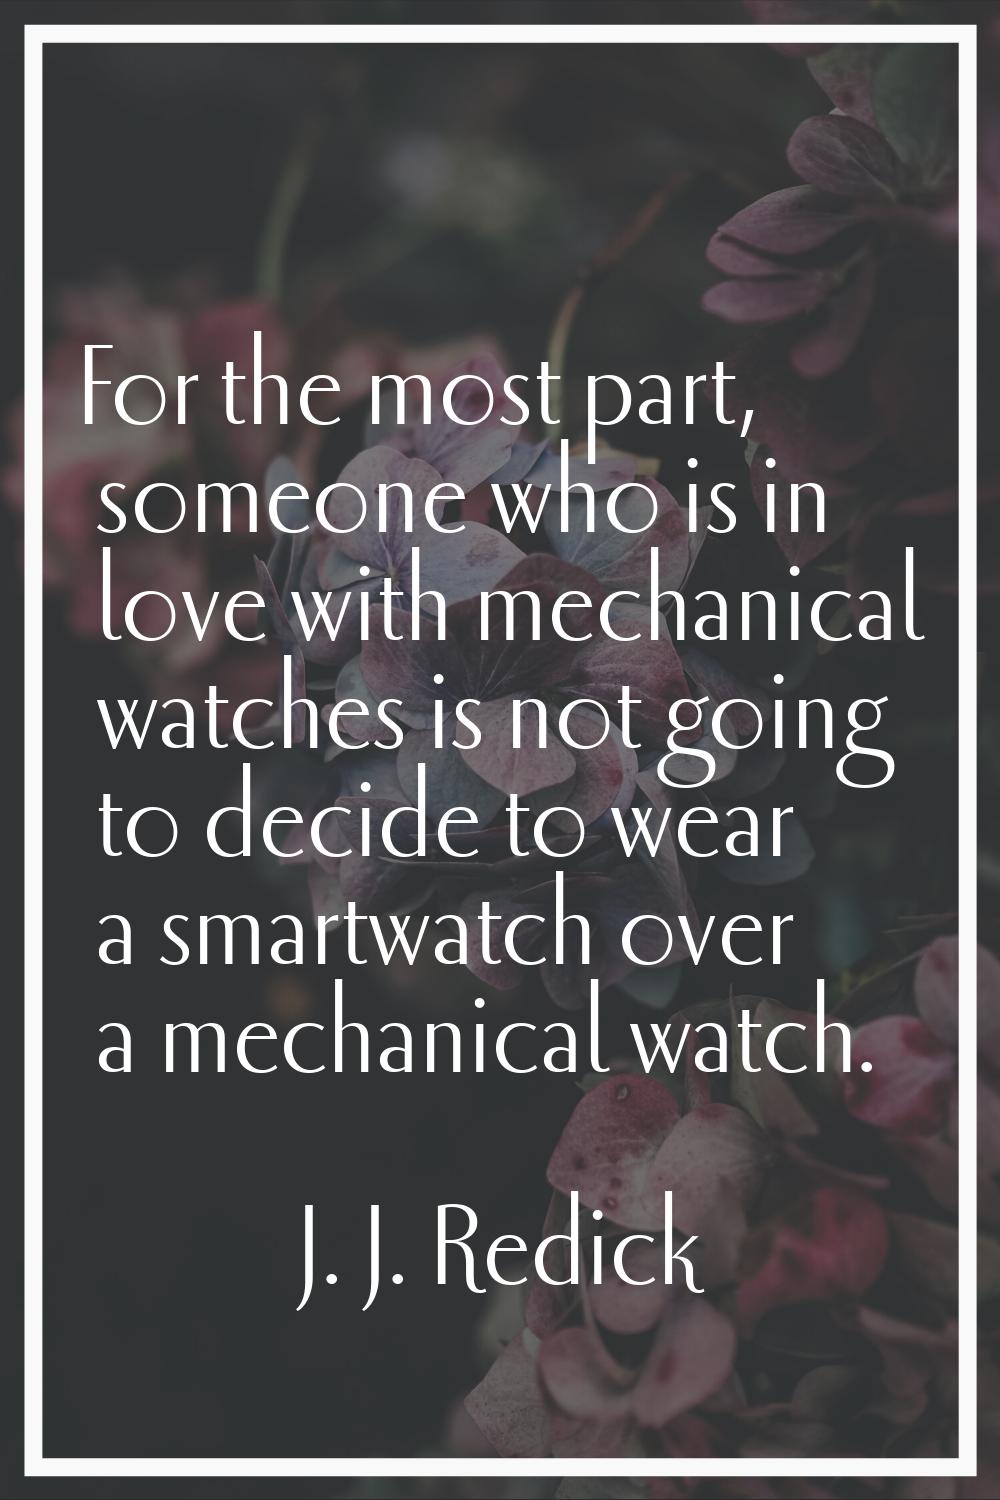 For the most part, someone who is in love with mechanical watches is not going to decide to wear a 